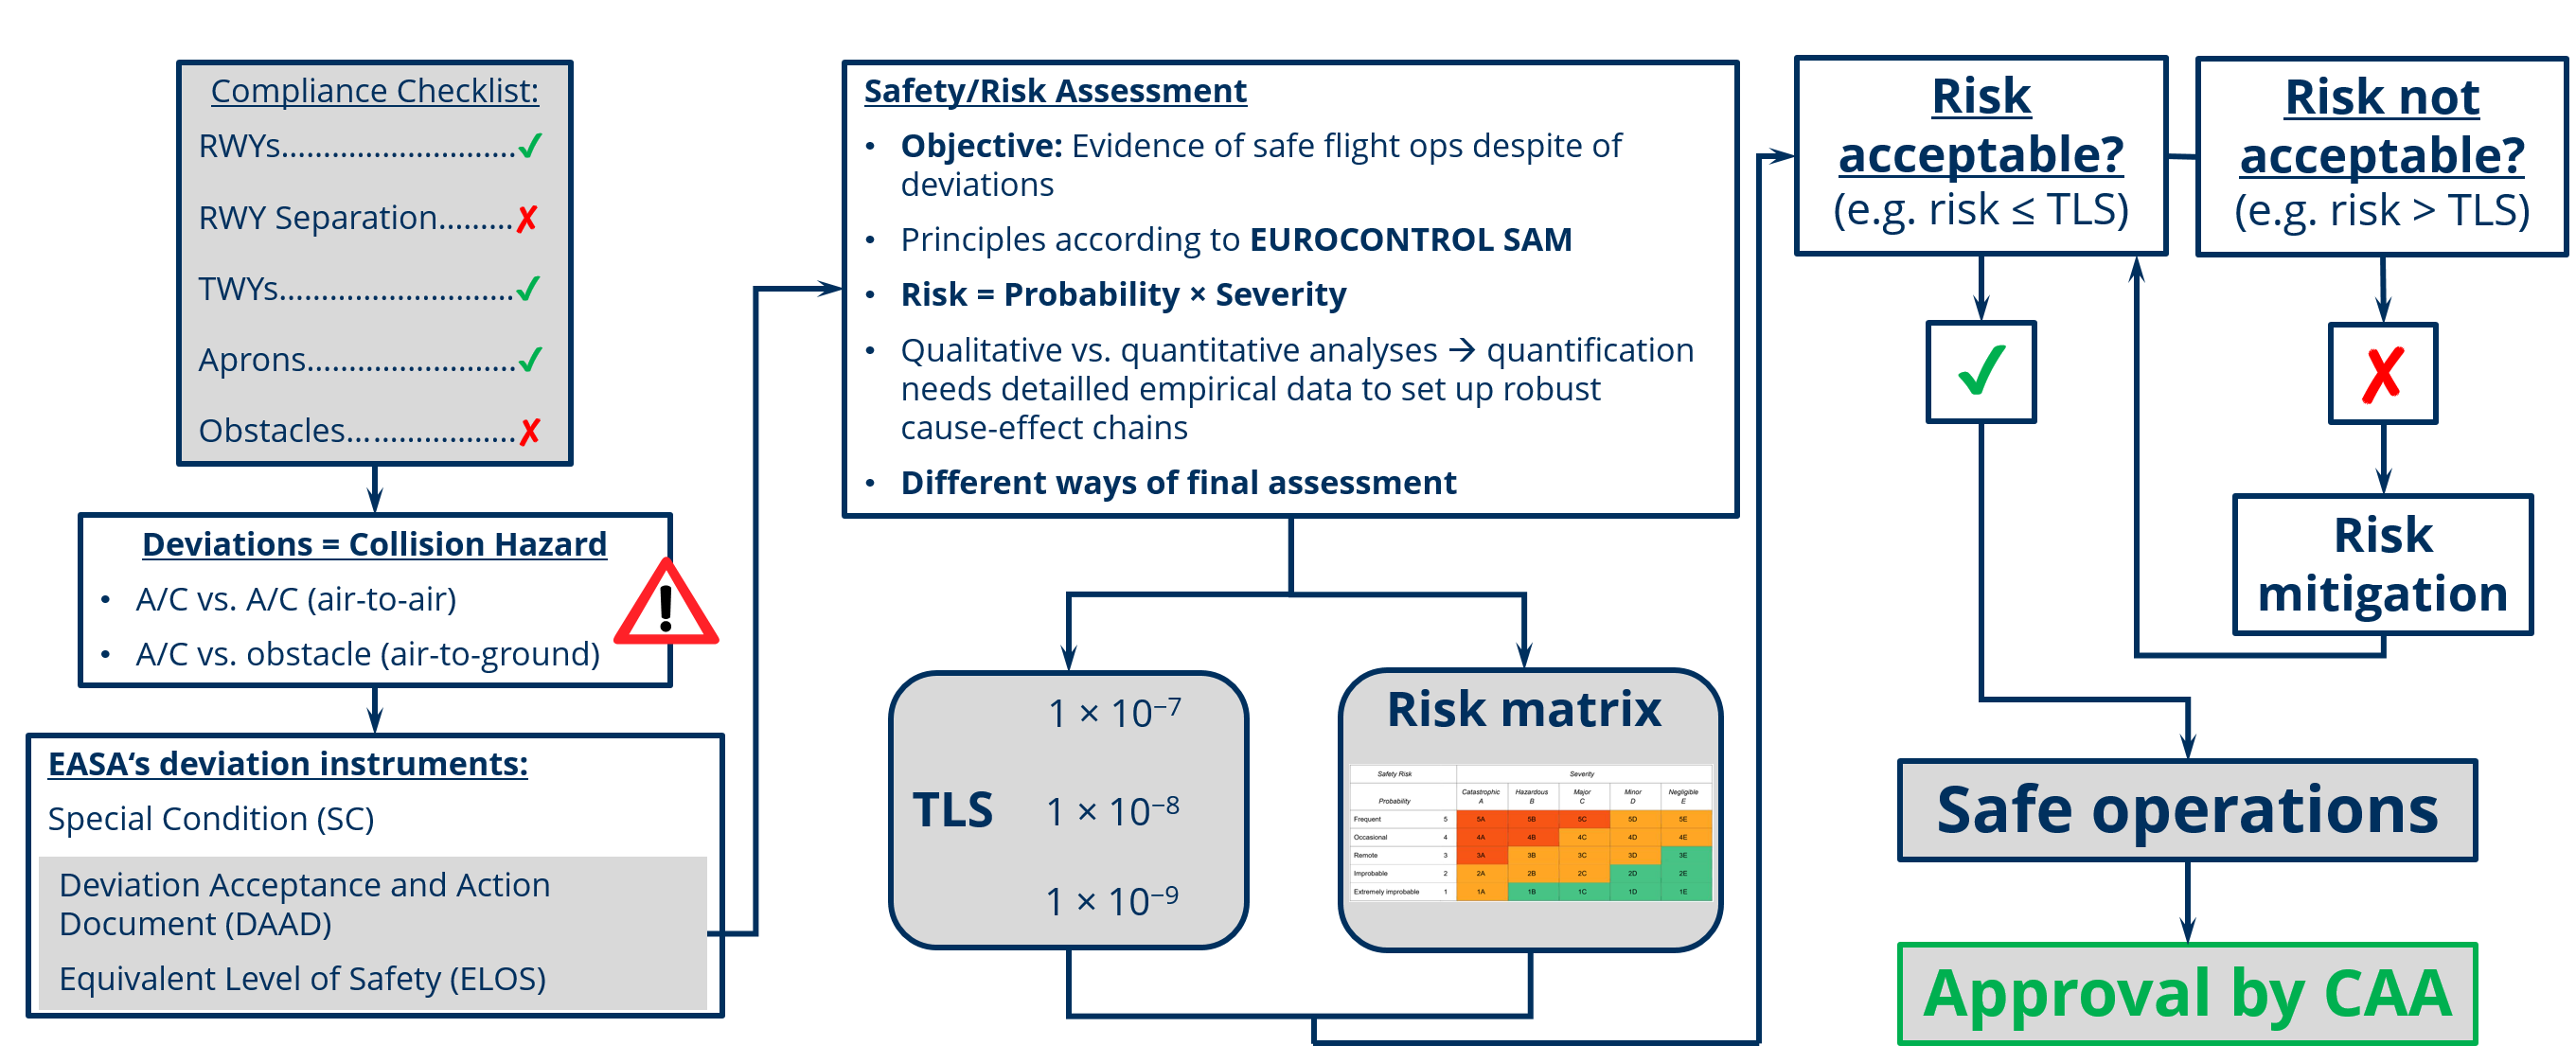 General scheme for risk determination in the event of detected guideline deviations (© GfL mbH)